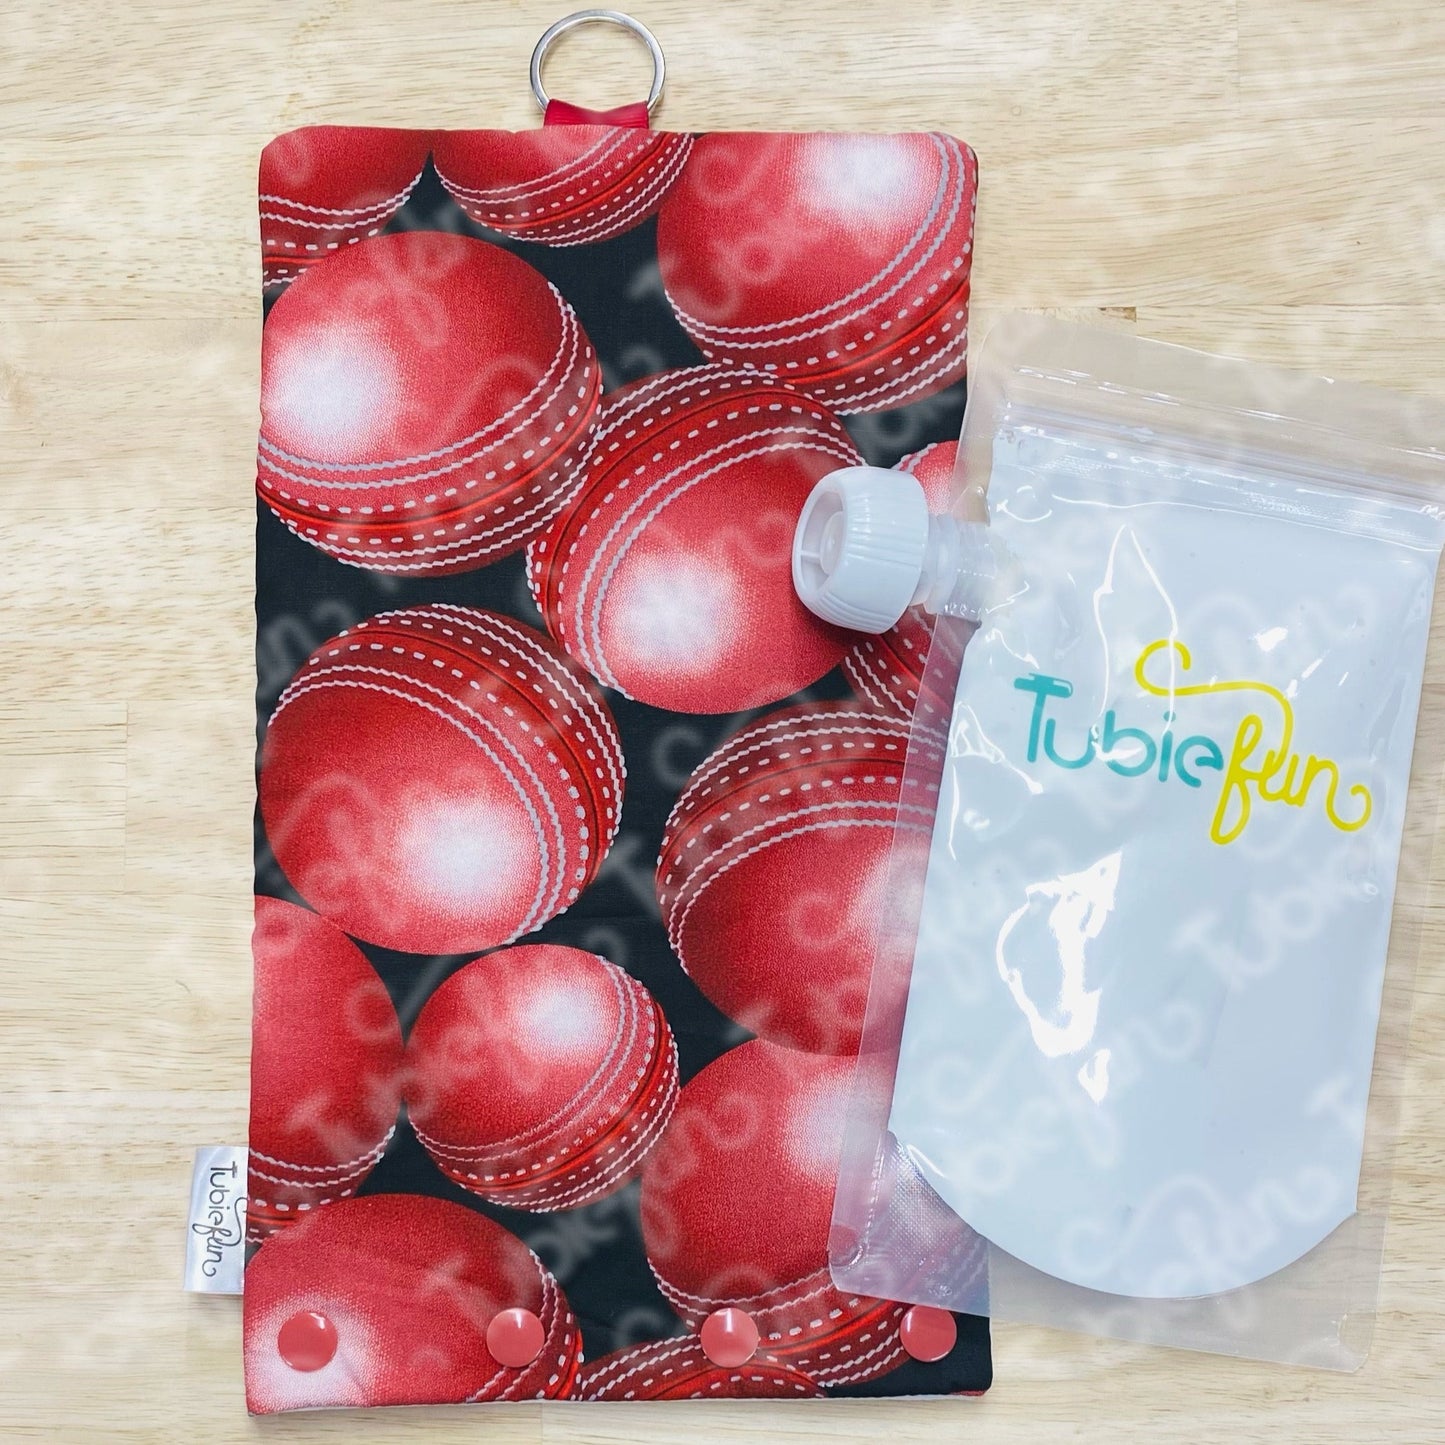 NEW Insulated Milk Bag Suitable for Tubie Fun 500ml Reusable Pouches - Cricket Balls